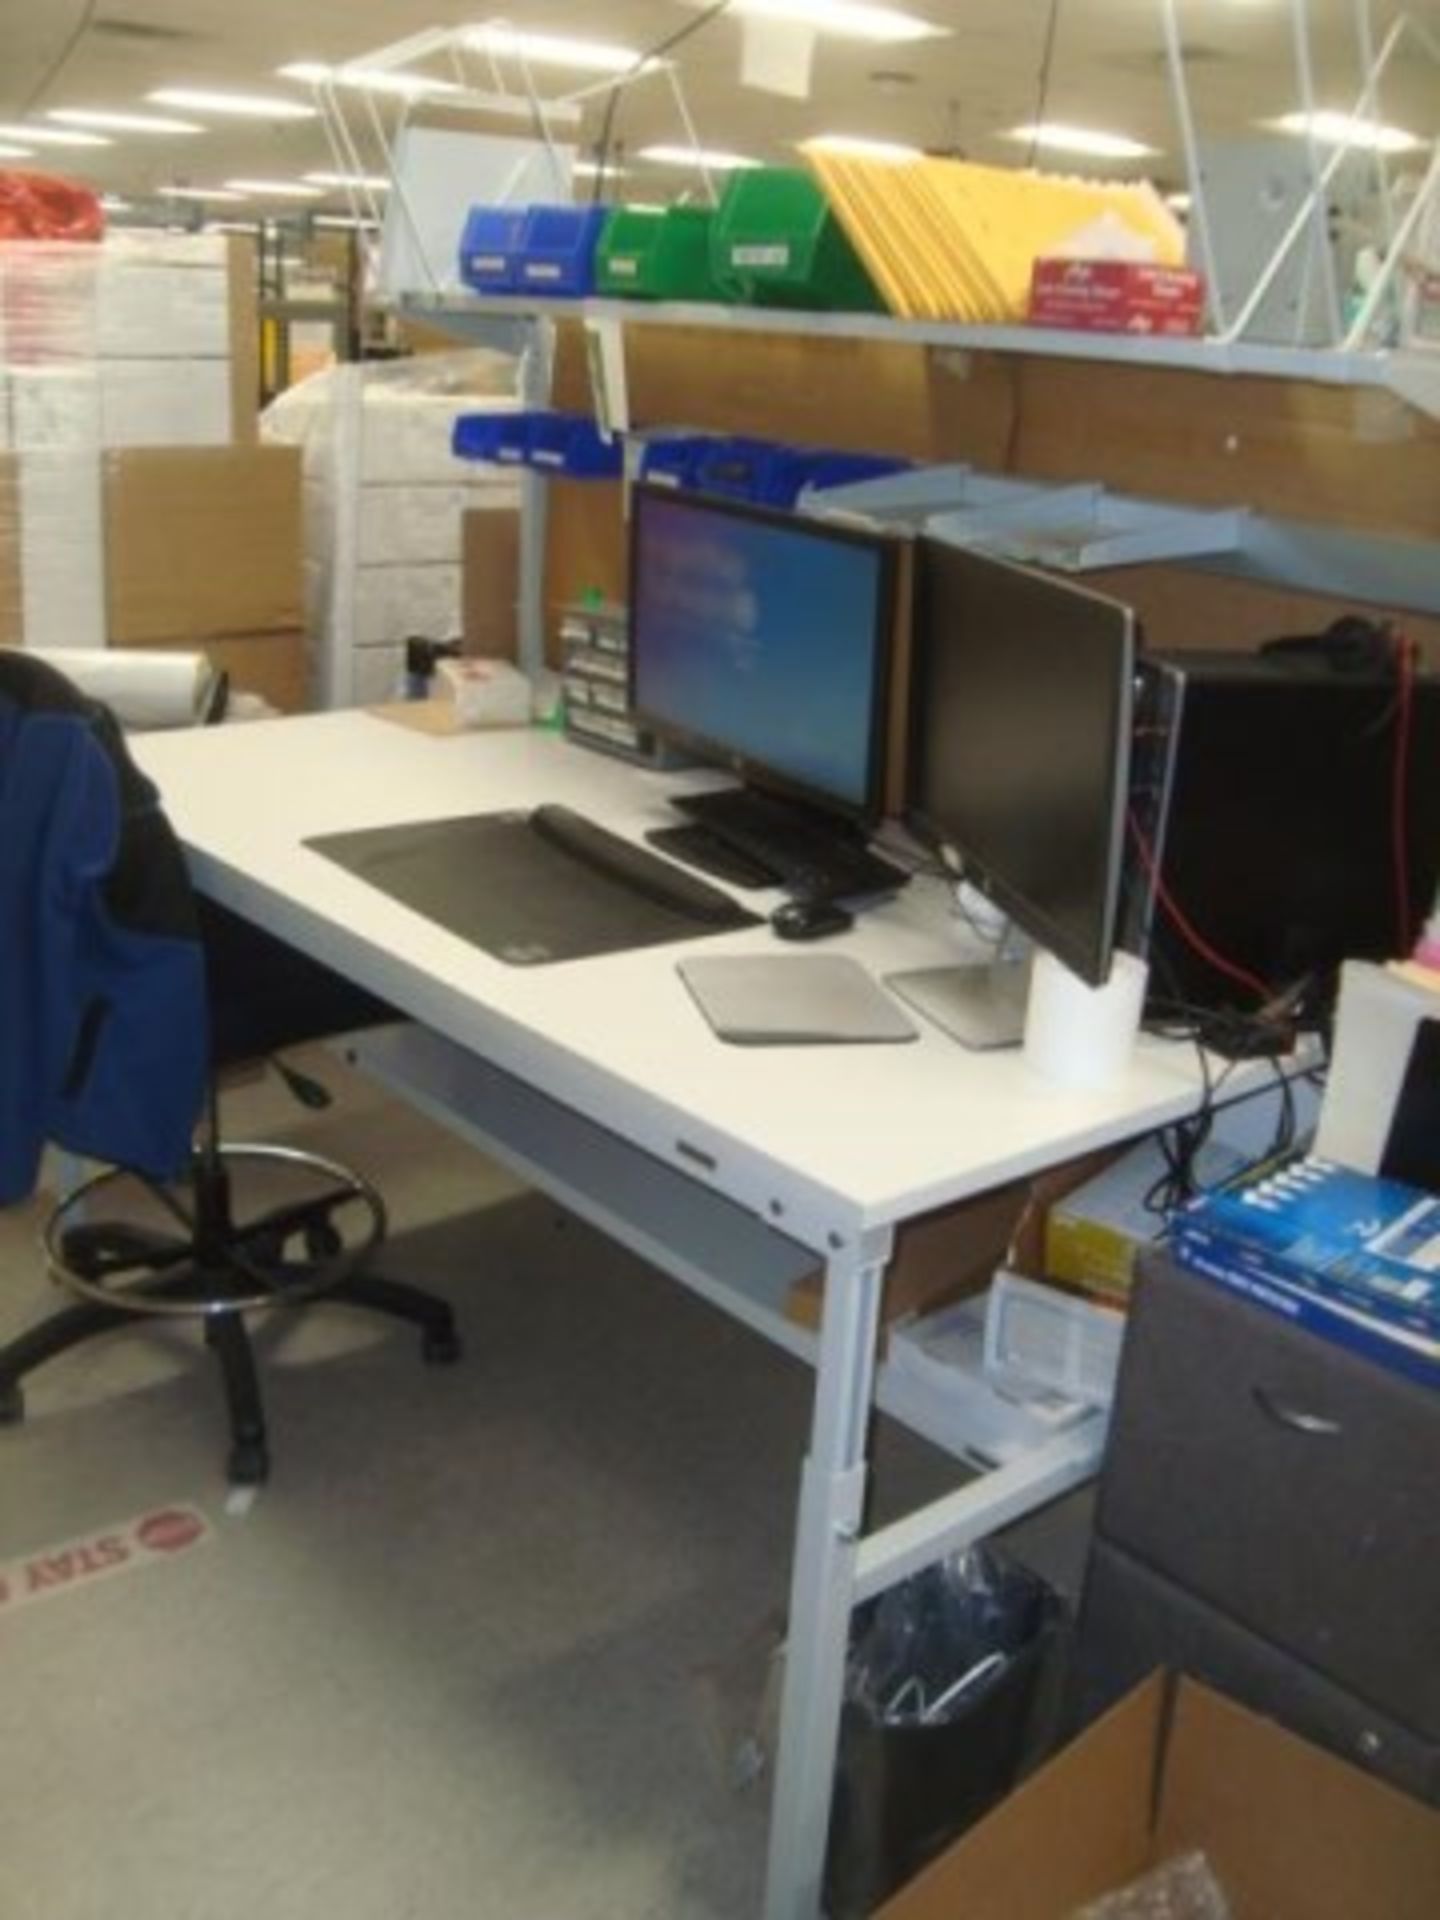 Technicians Workstation Benches - Image 2 of 8